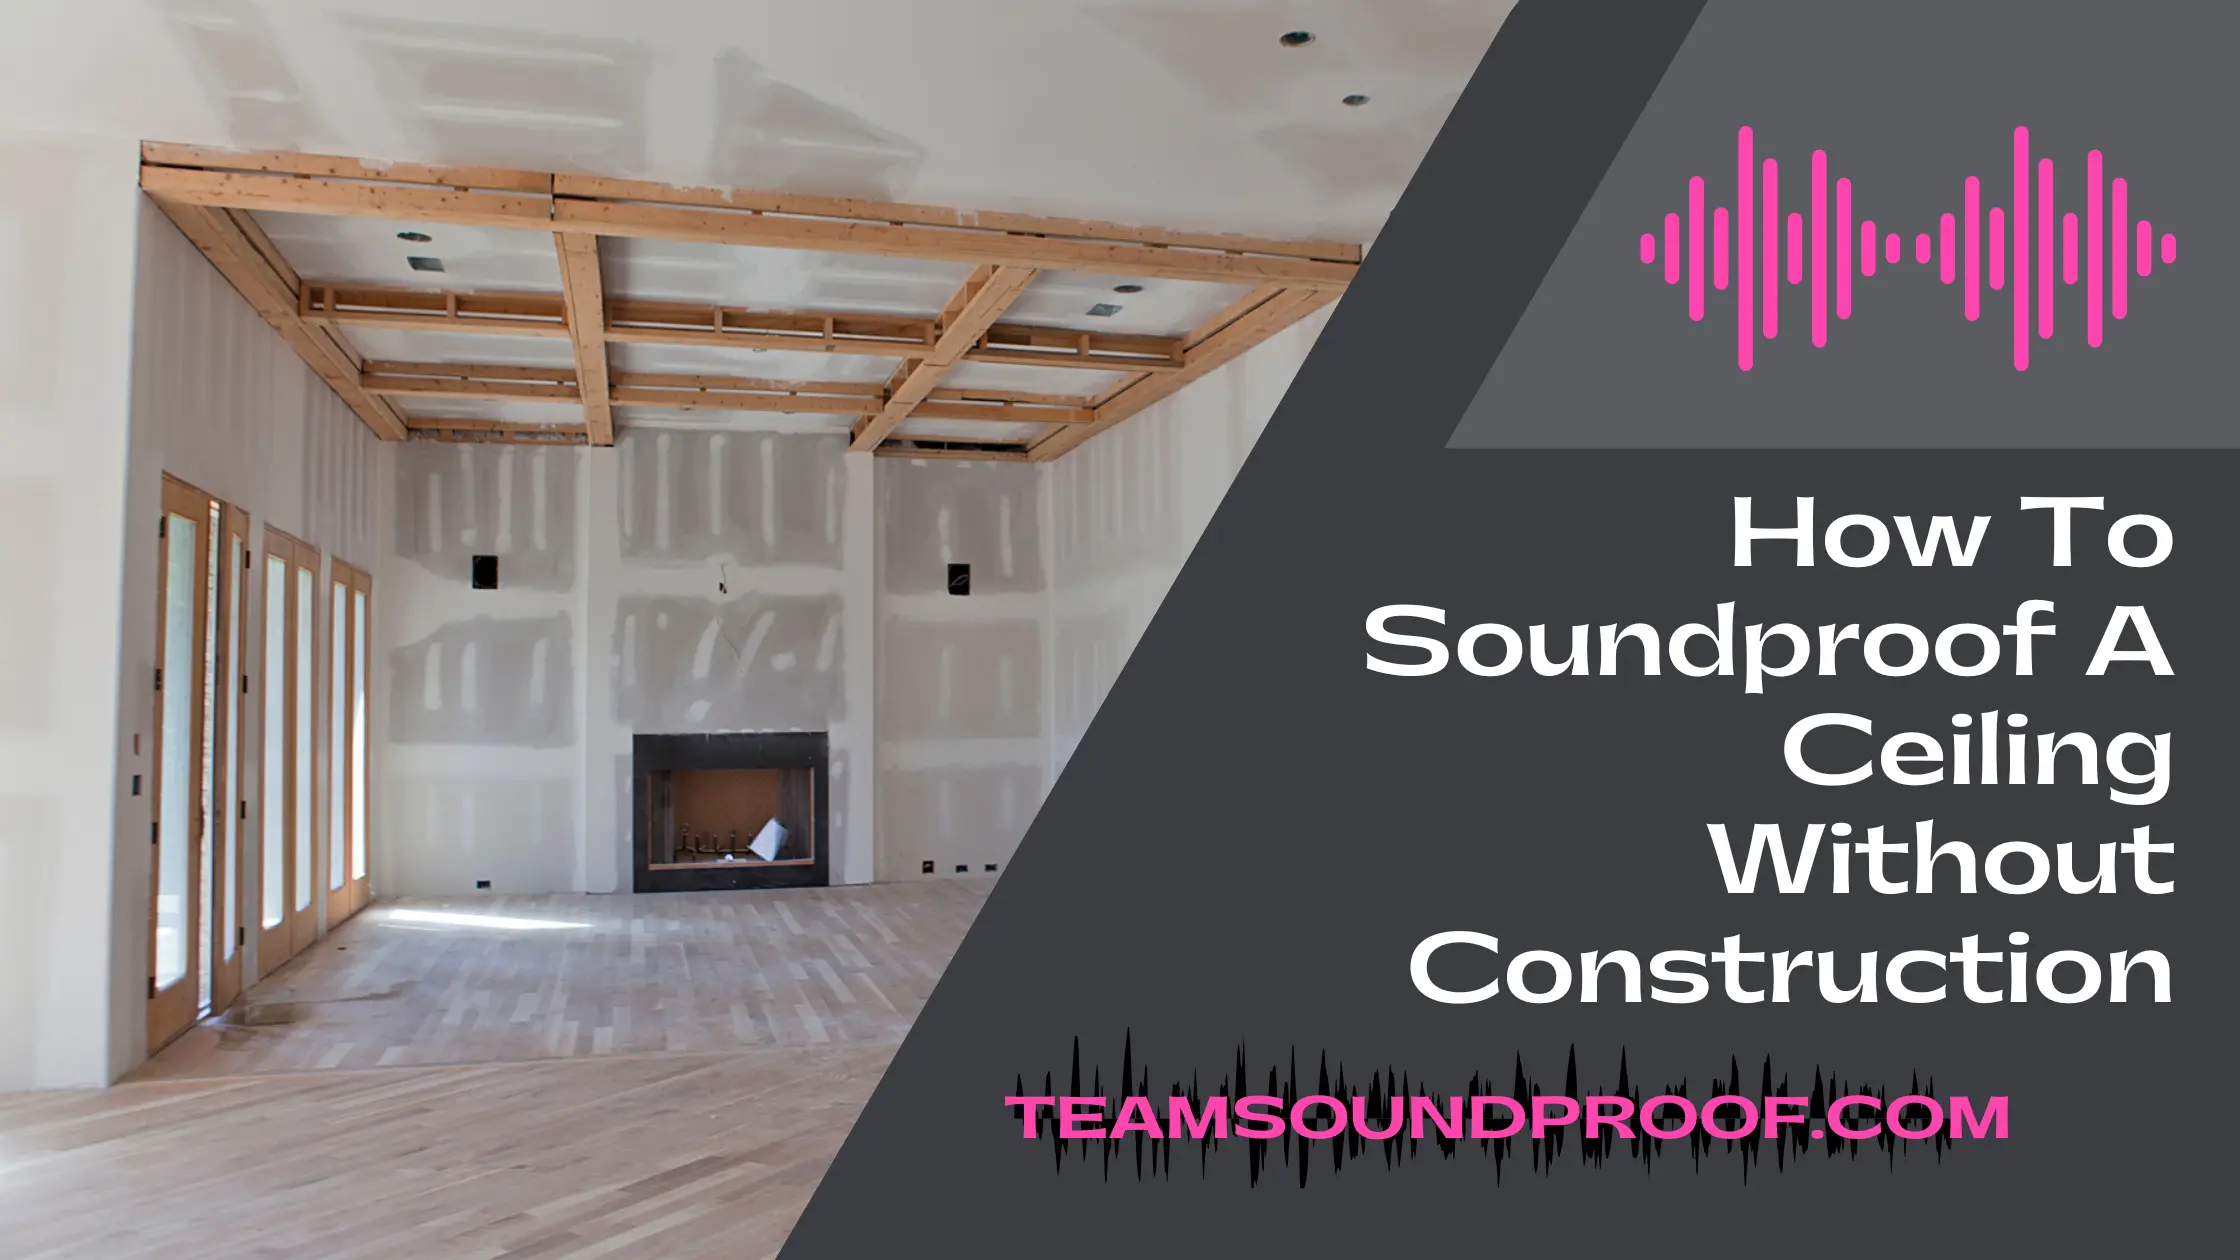 How To Soundproof A Ceiling Without Construction? That Really Work